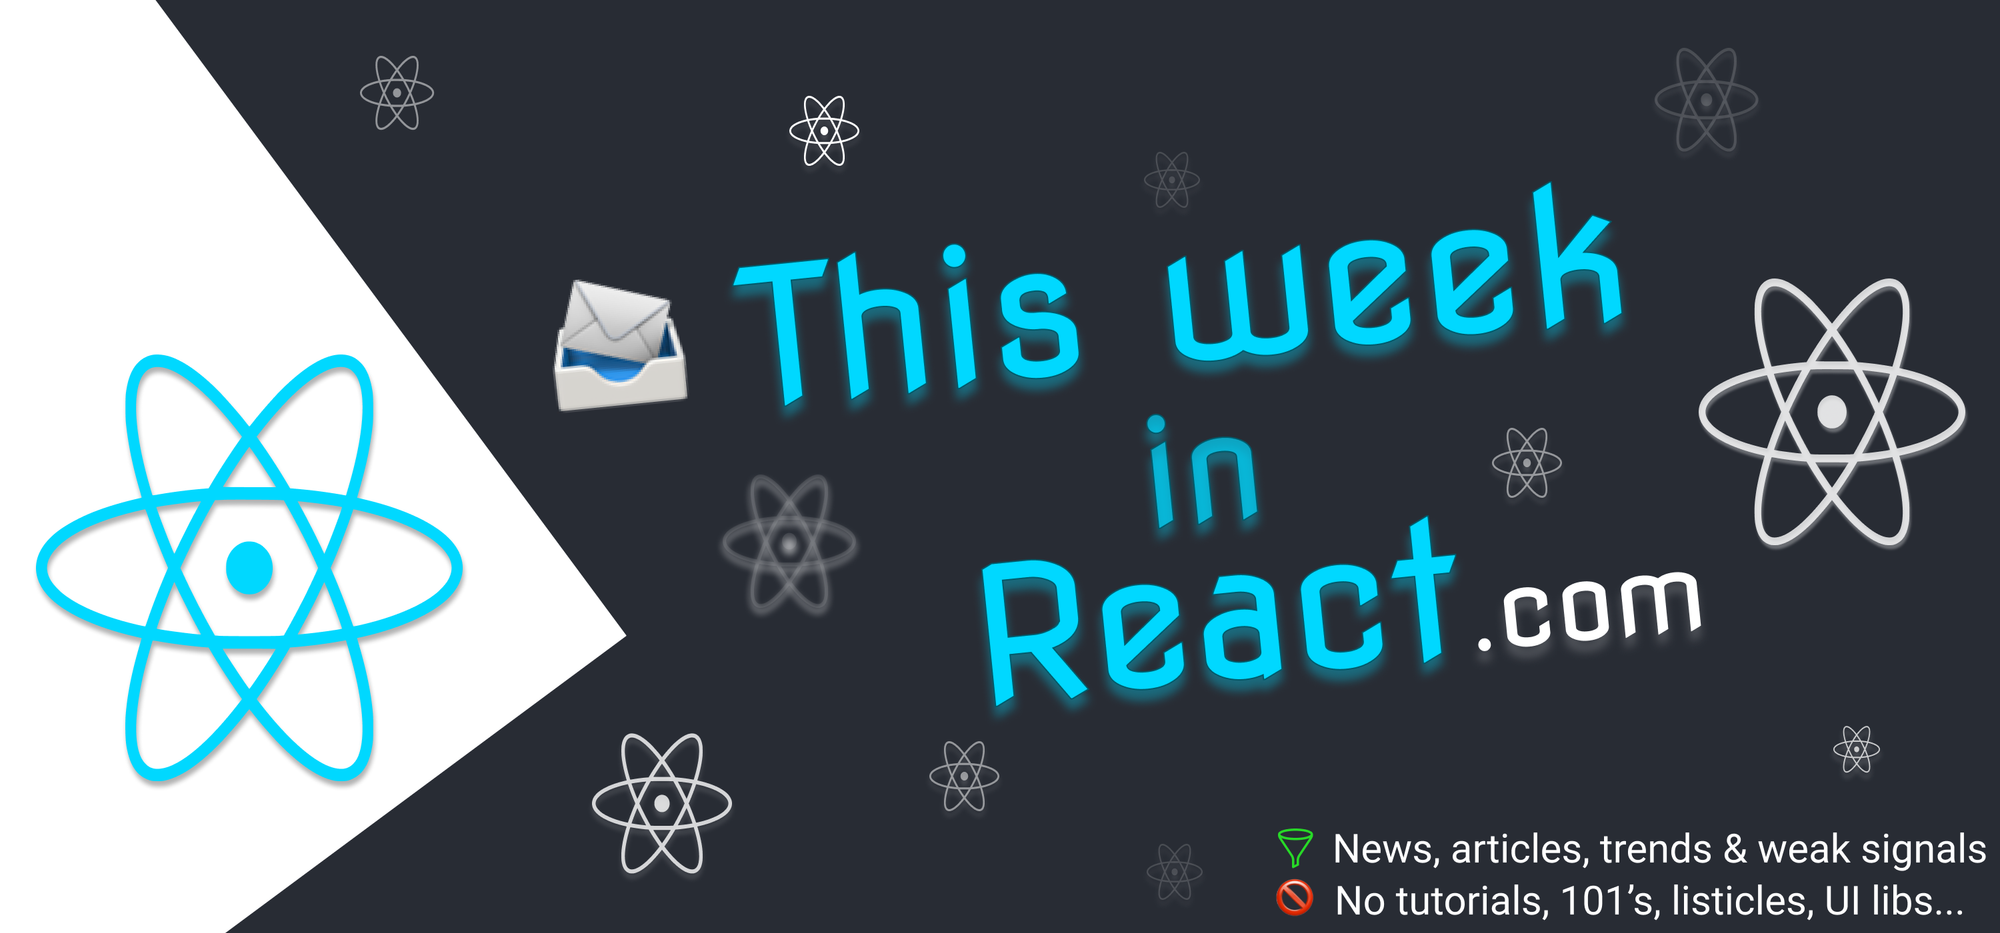 This Week In React #129: useEffectEvent, Storybook, OpenNEXT, React Email, Remix, Next.js, Pointer-Events, Expo-MDX, Expo-Image, Svelte... | This Week In React